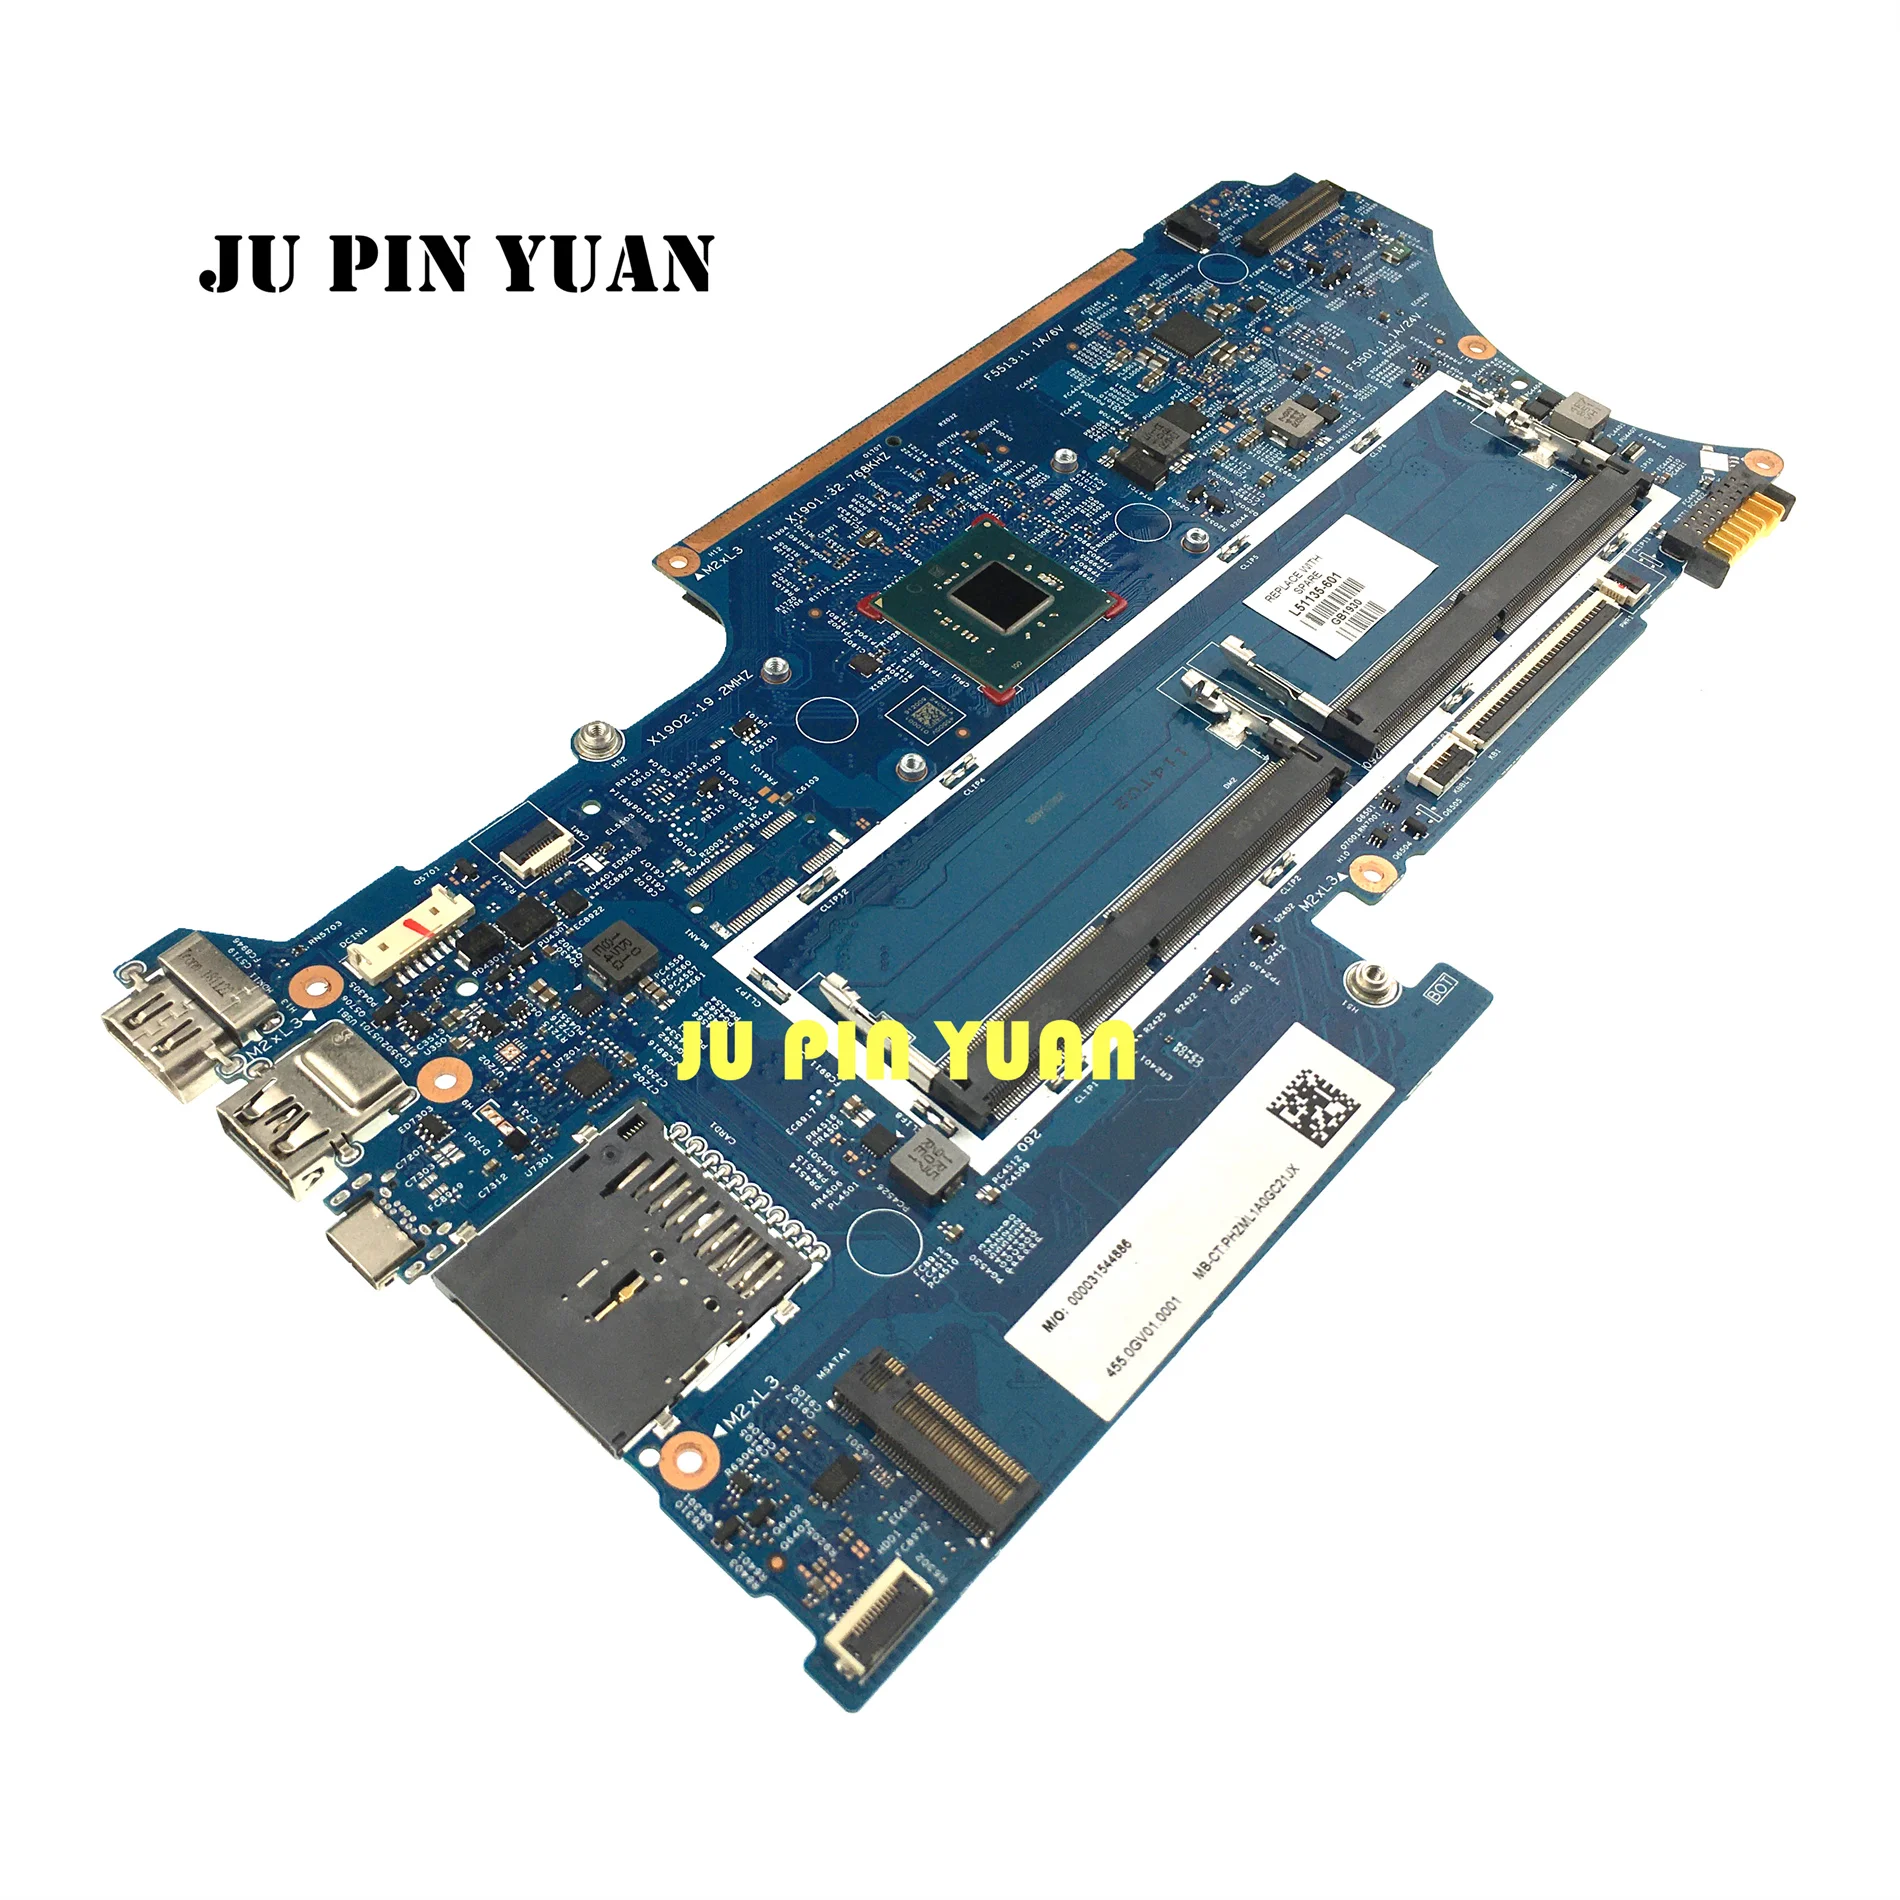 

For HP Pavilion X360 14-DH 14T-DH Laptop Mainboard L51135-601 L51135-001 18807-1 448.0GG06.0011 With N5000 CPU Full Tested OK